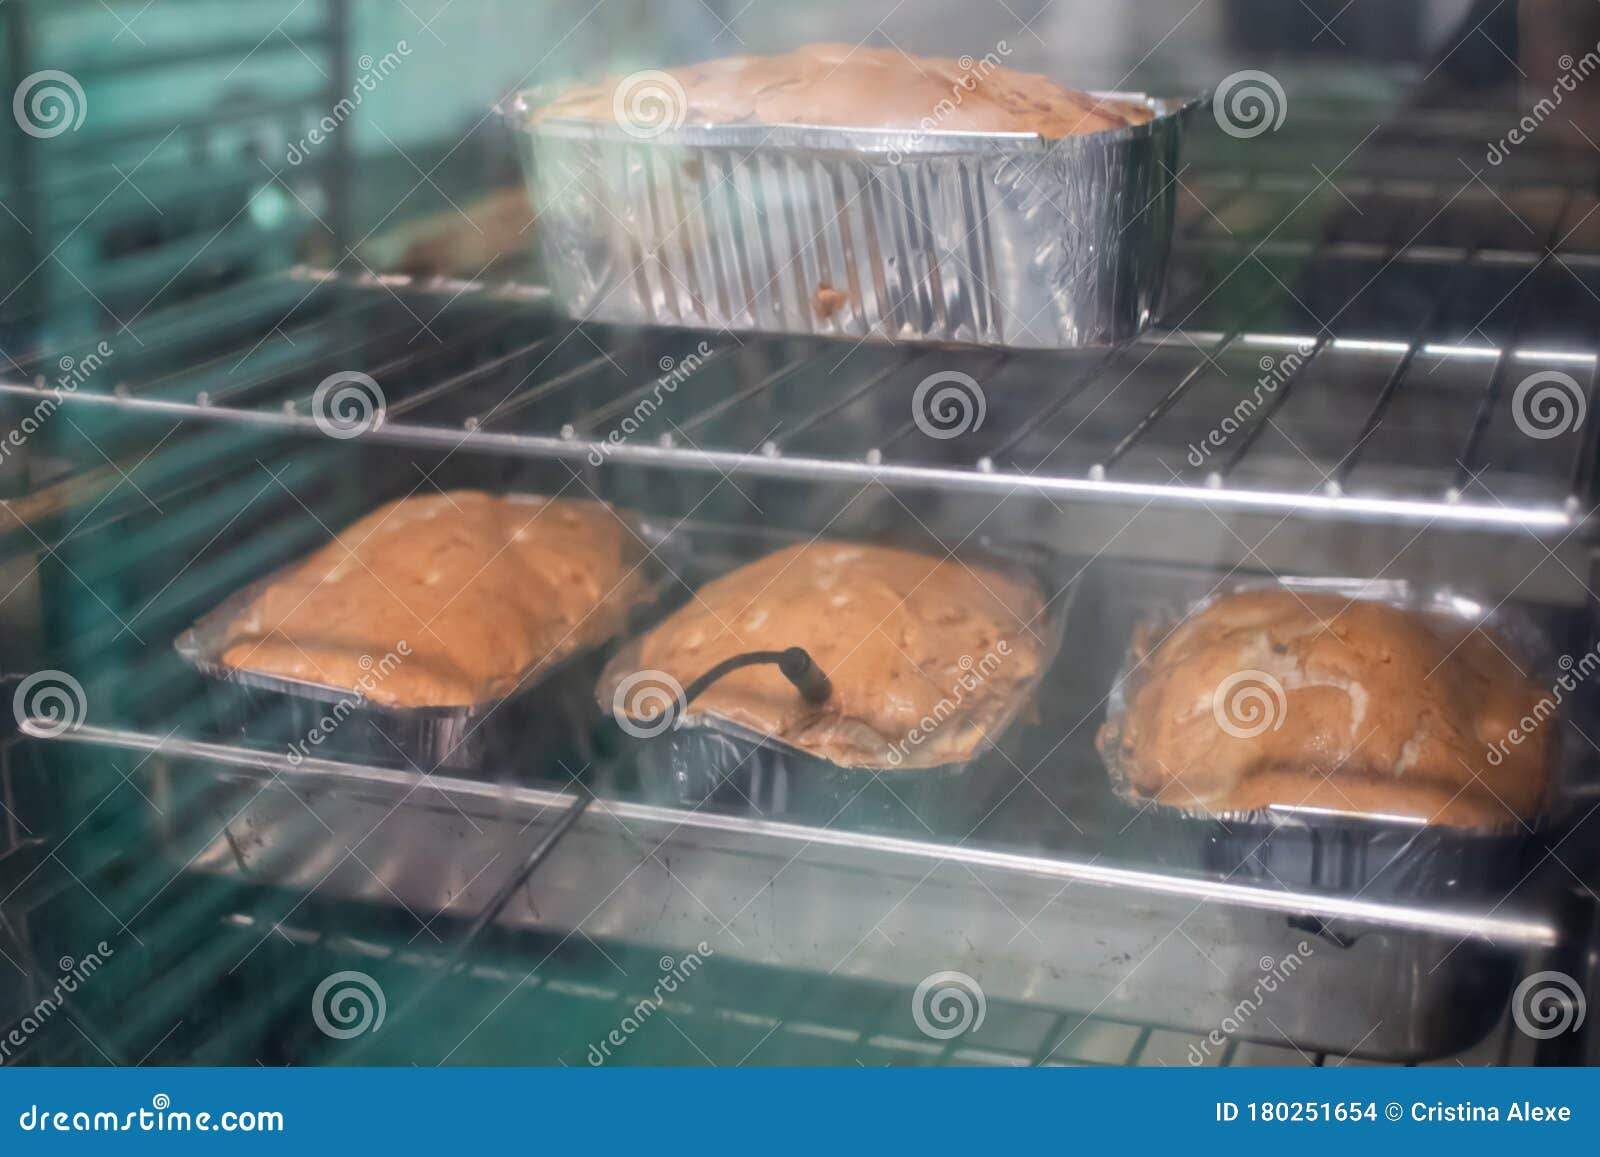 Meatloaf In Trays Fresh Pulled Out From The Oven Stock Photo Image Of Oven Chopper 180251654